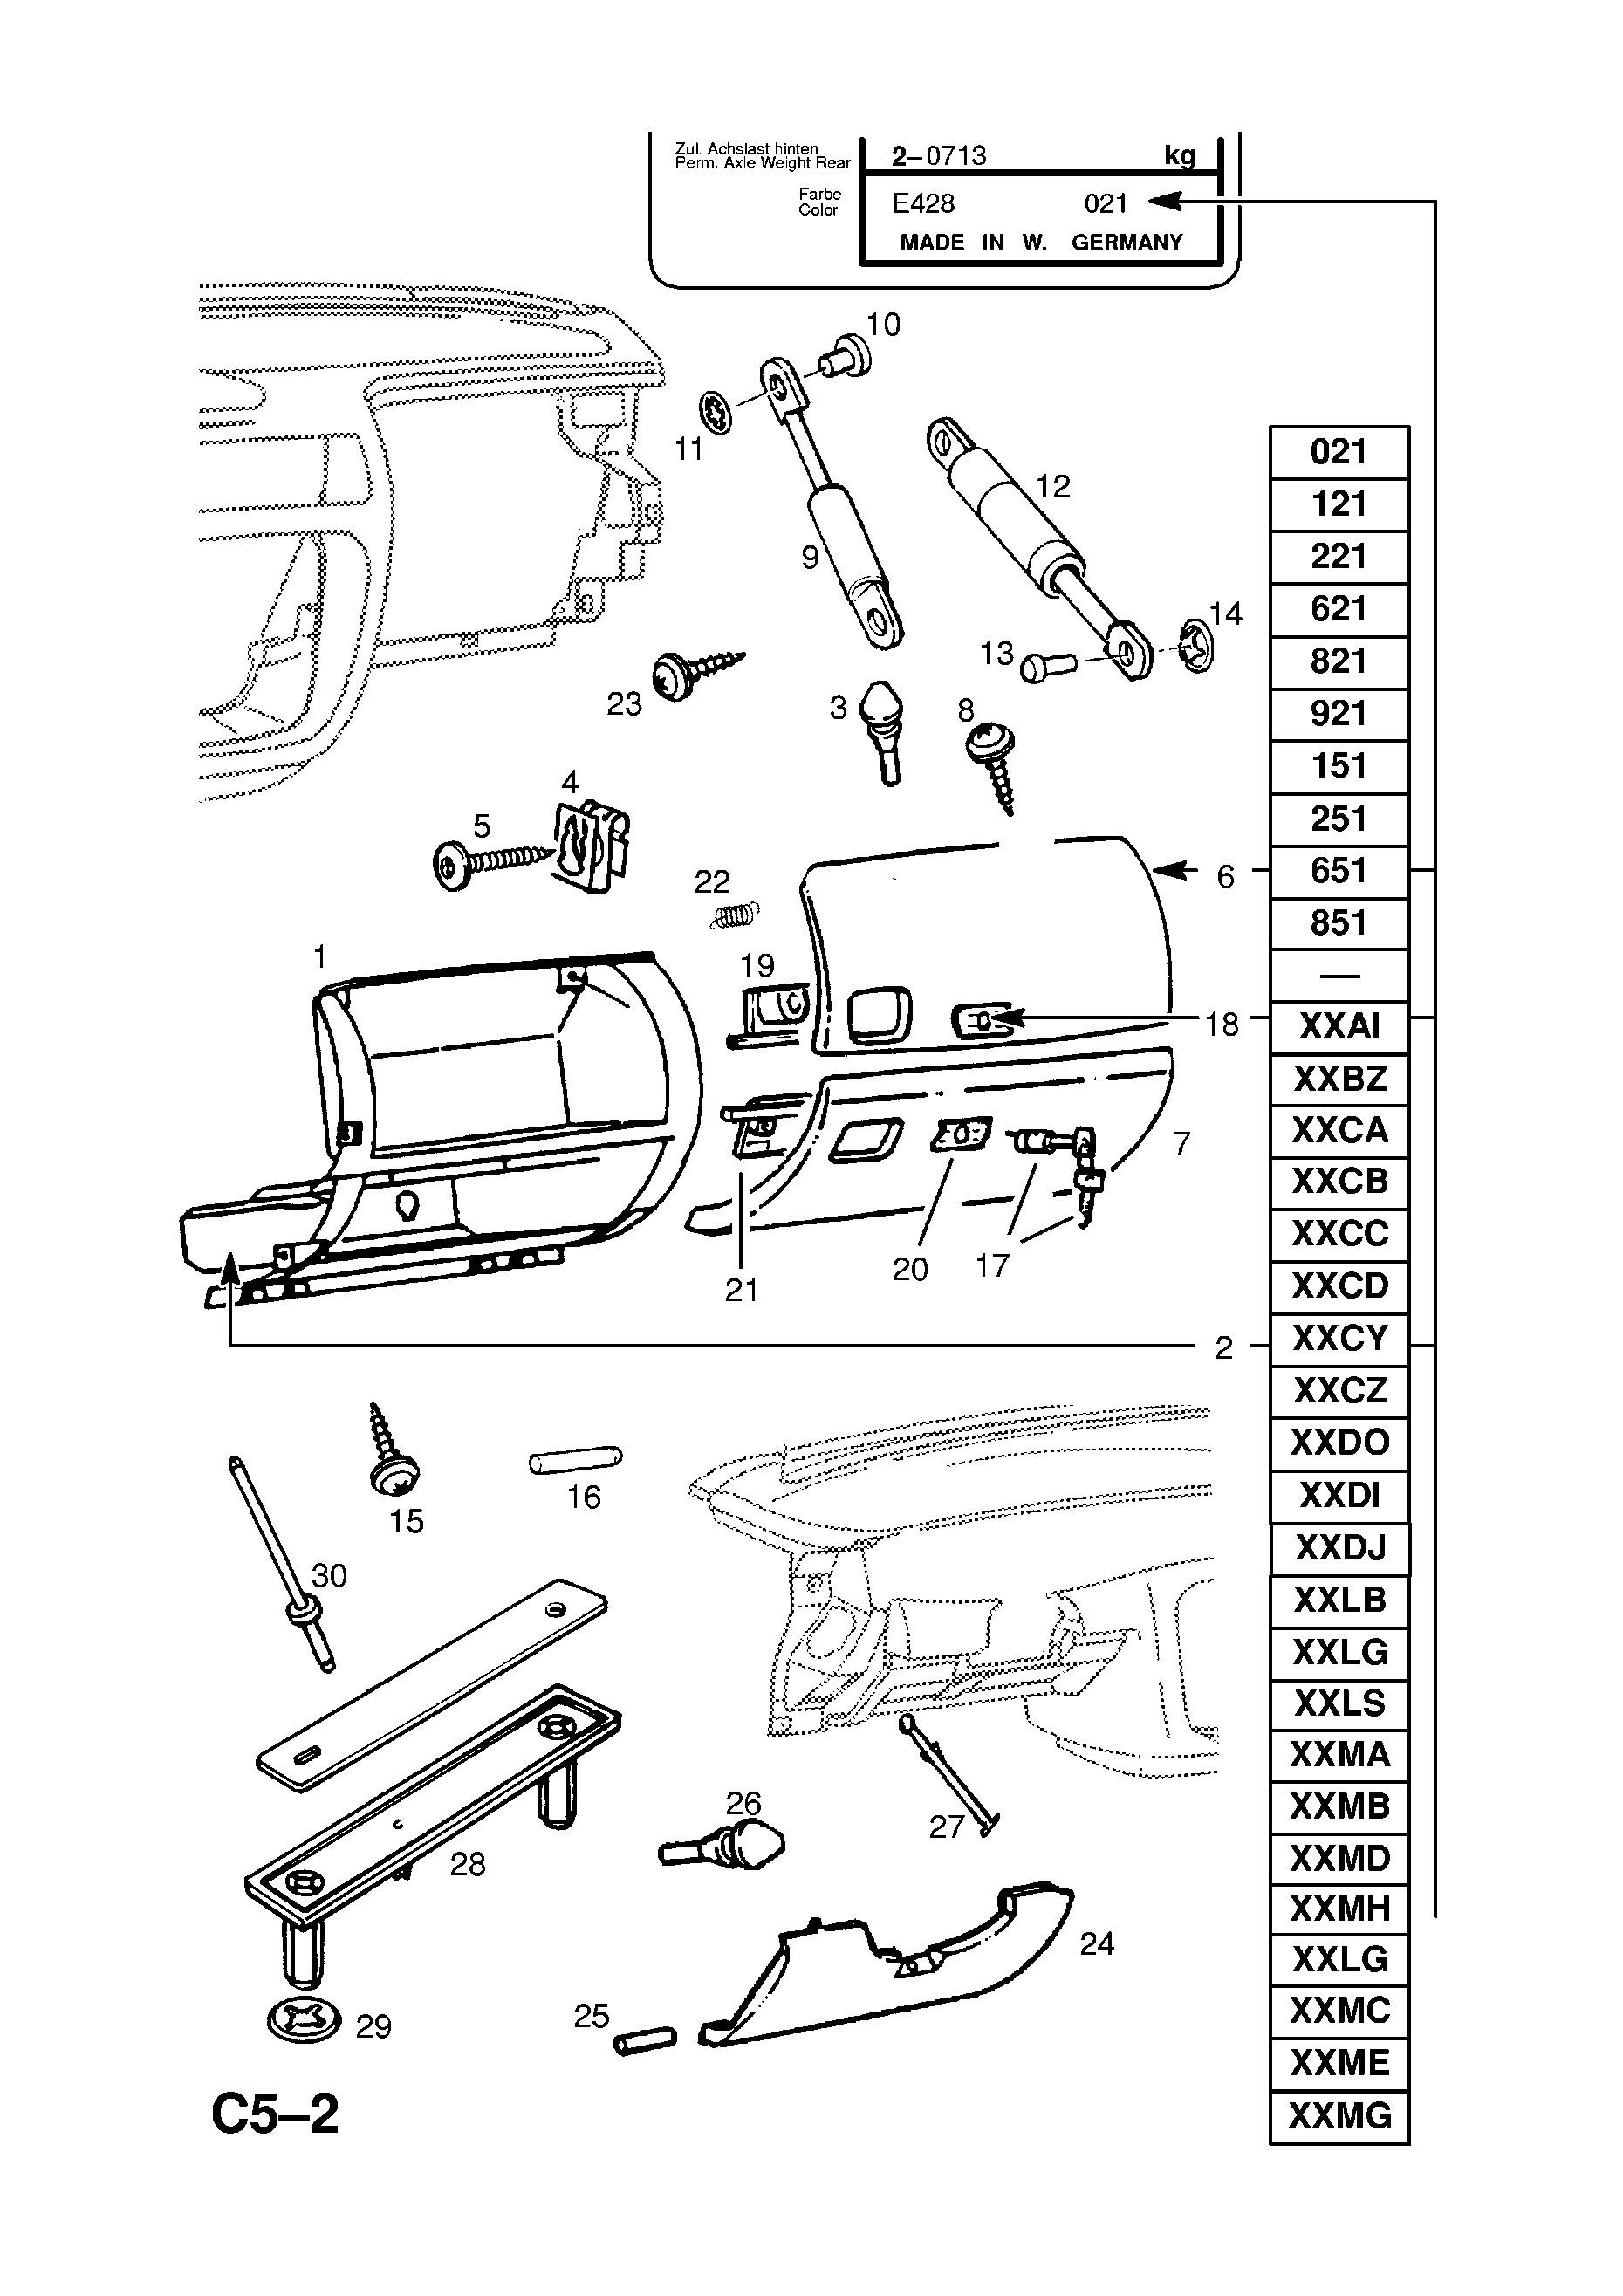 INSTRUMENT PANEL VEHICLE IDENTIFICATION PLATE FITTINGS